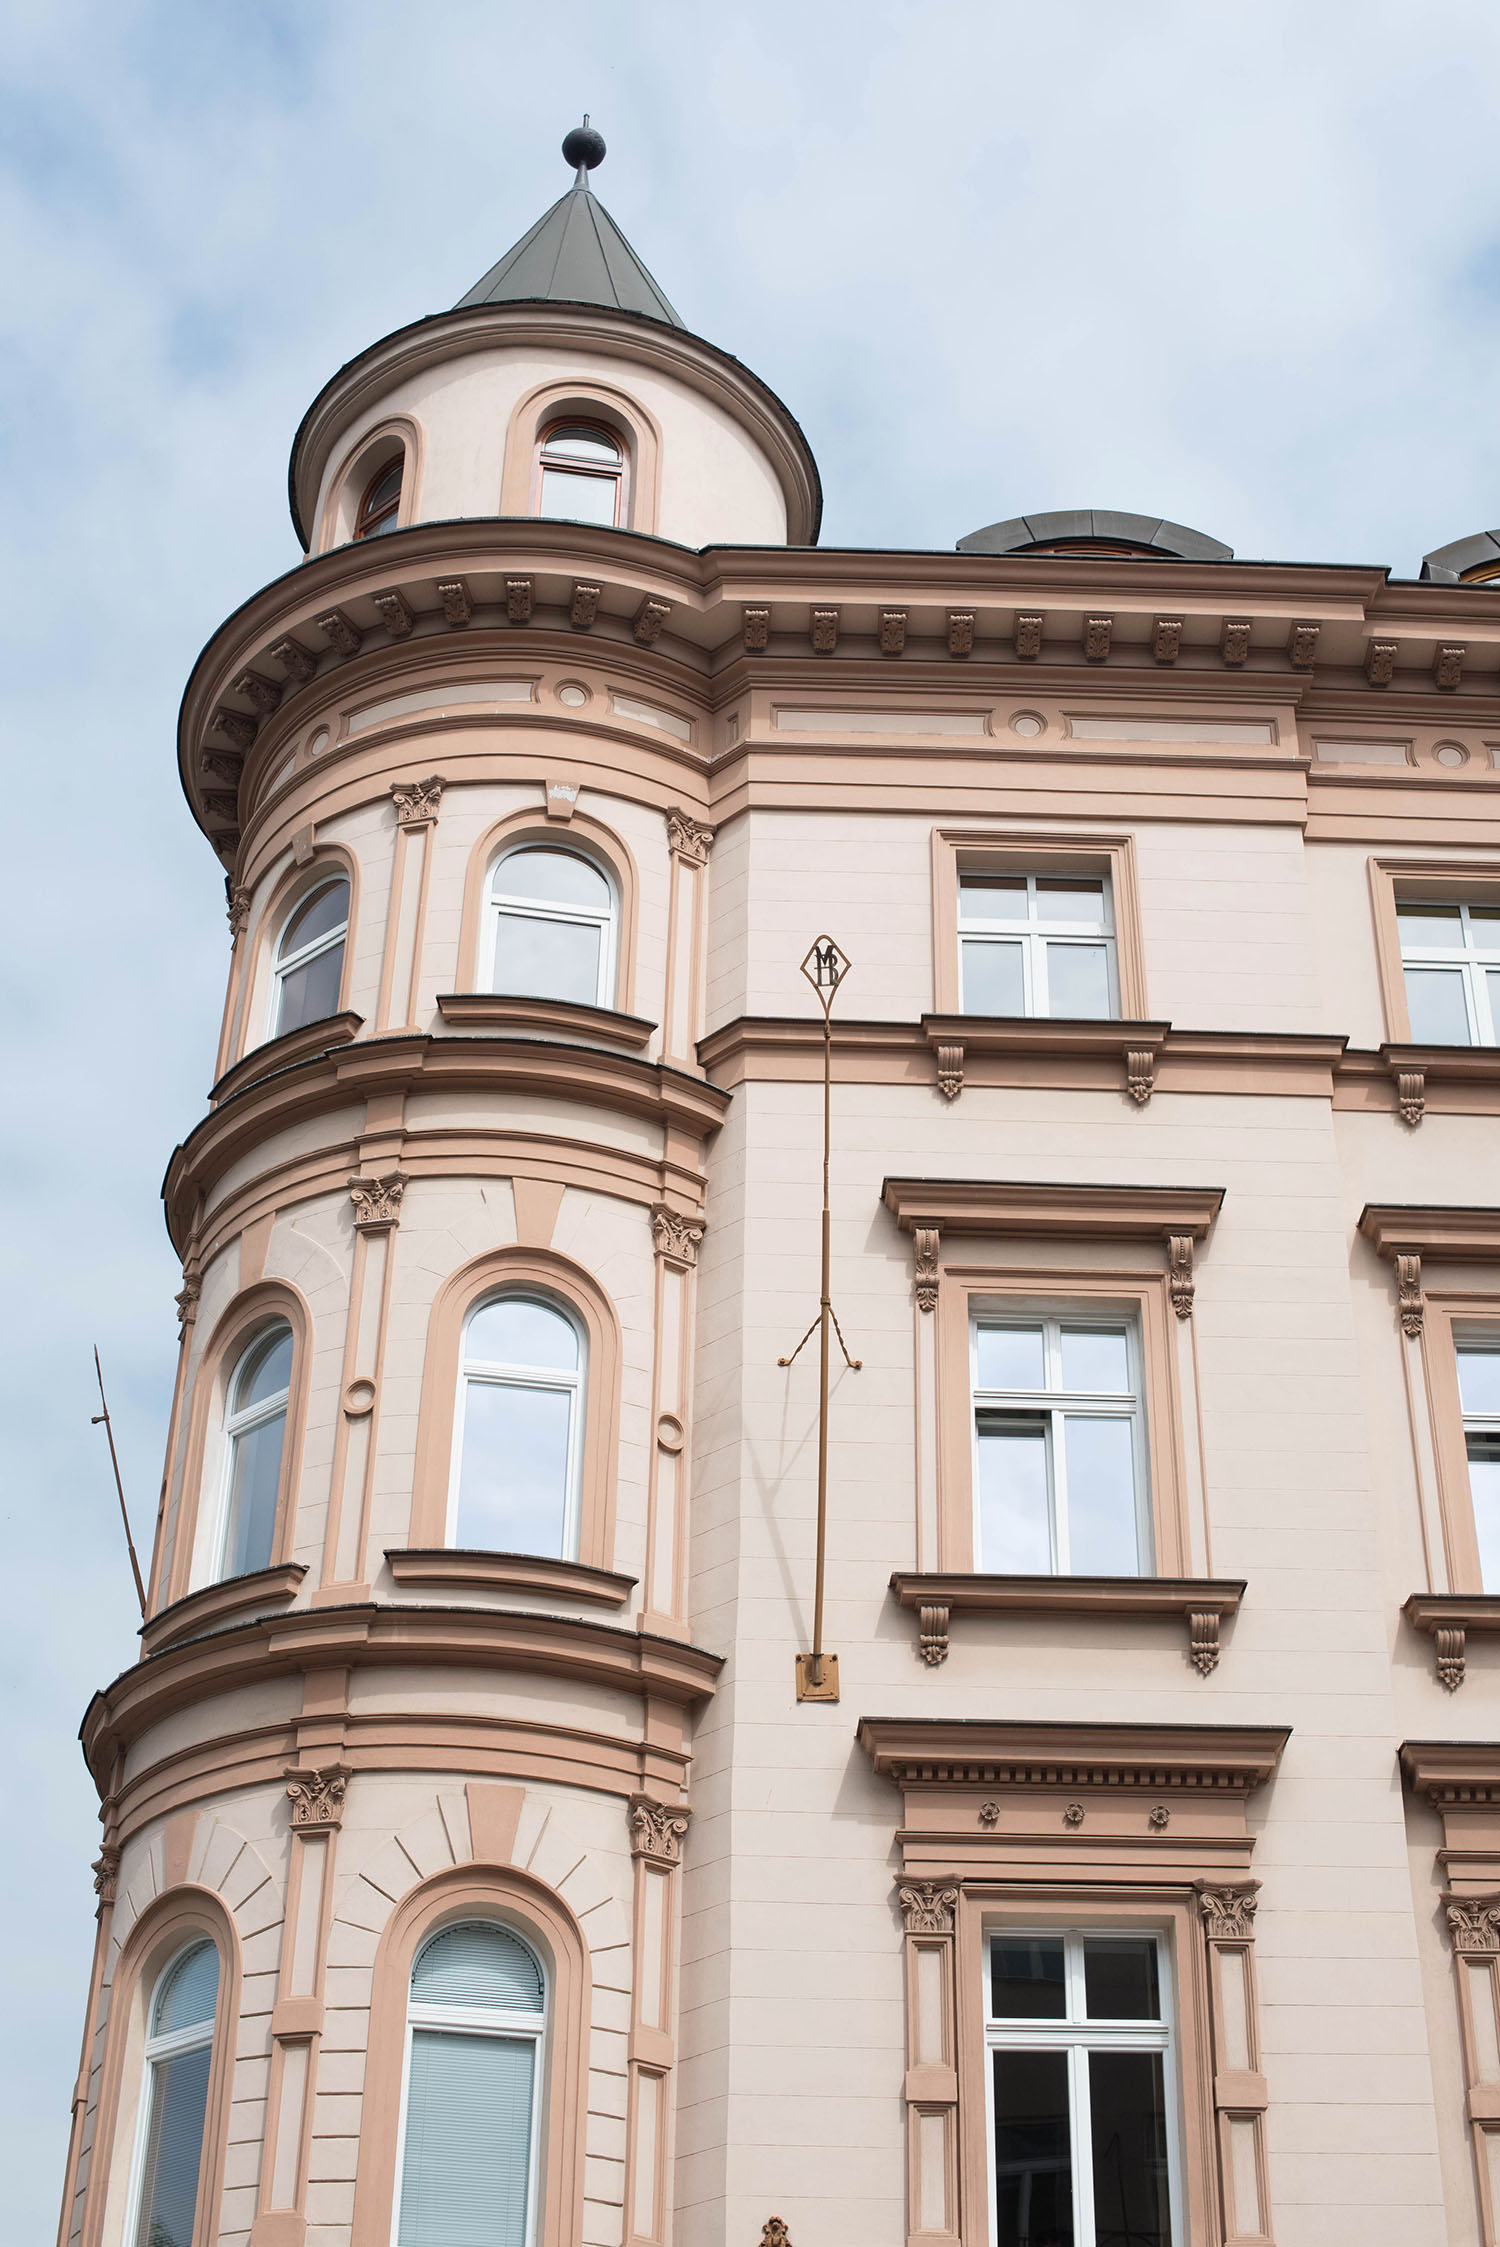 The facade of a pink apartment building in Prague, Czech Republic, as captured by travel blogger Cee Fardoe of Coco & Vera